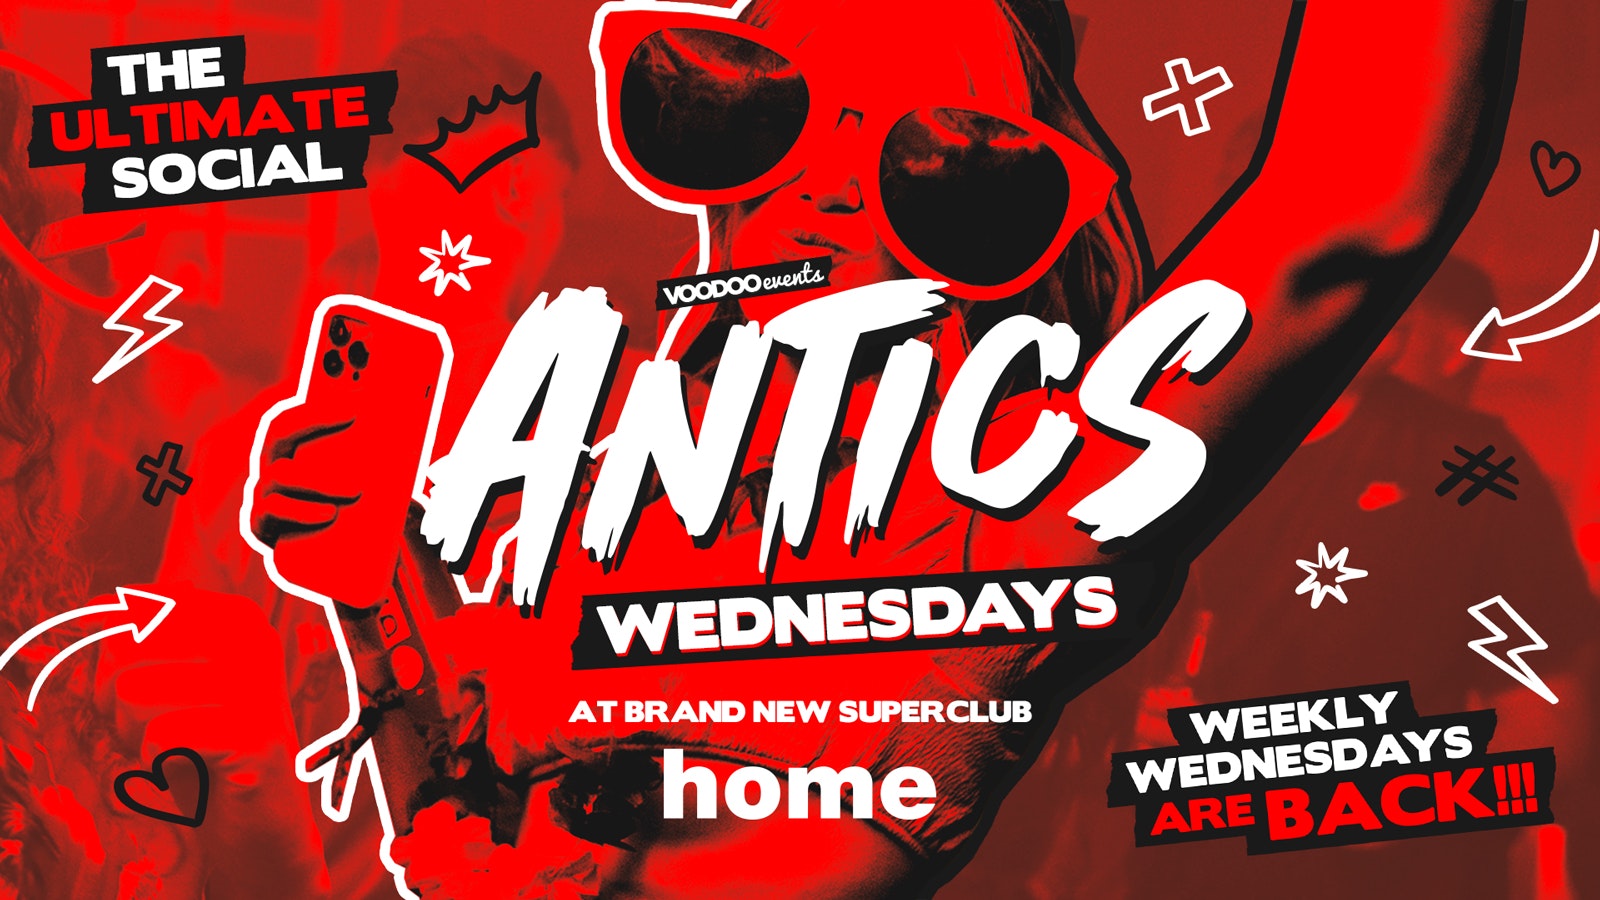 Antics @ THE BRAND NEW SUPER CLUB HOME – Wednesday 14th August